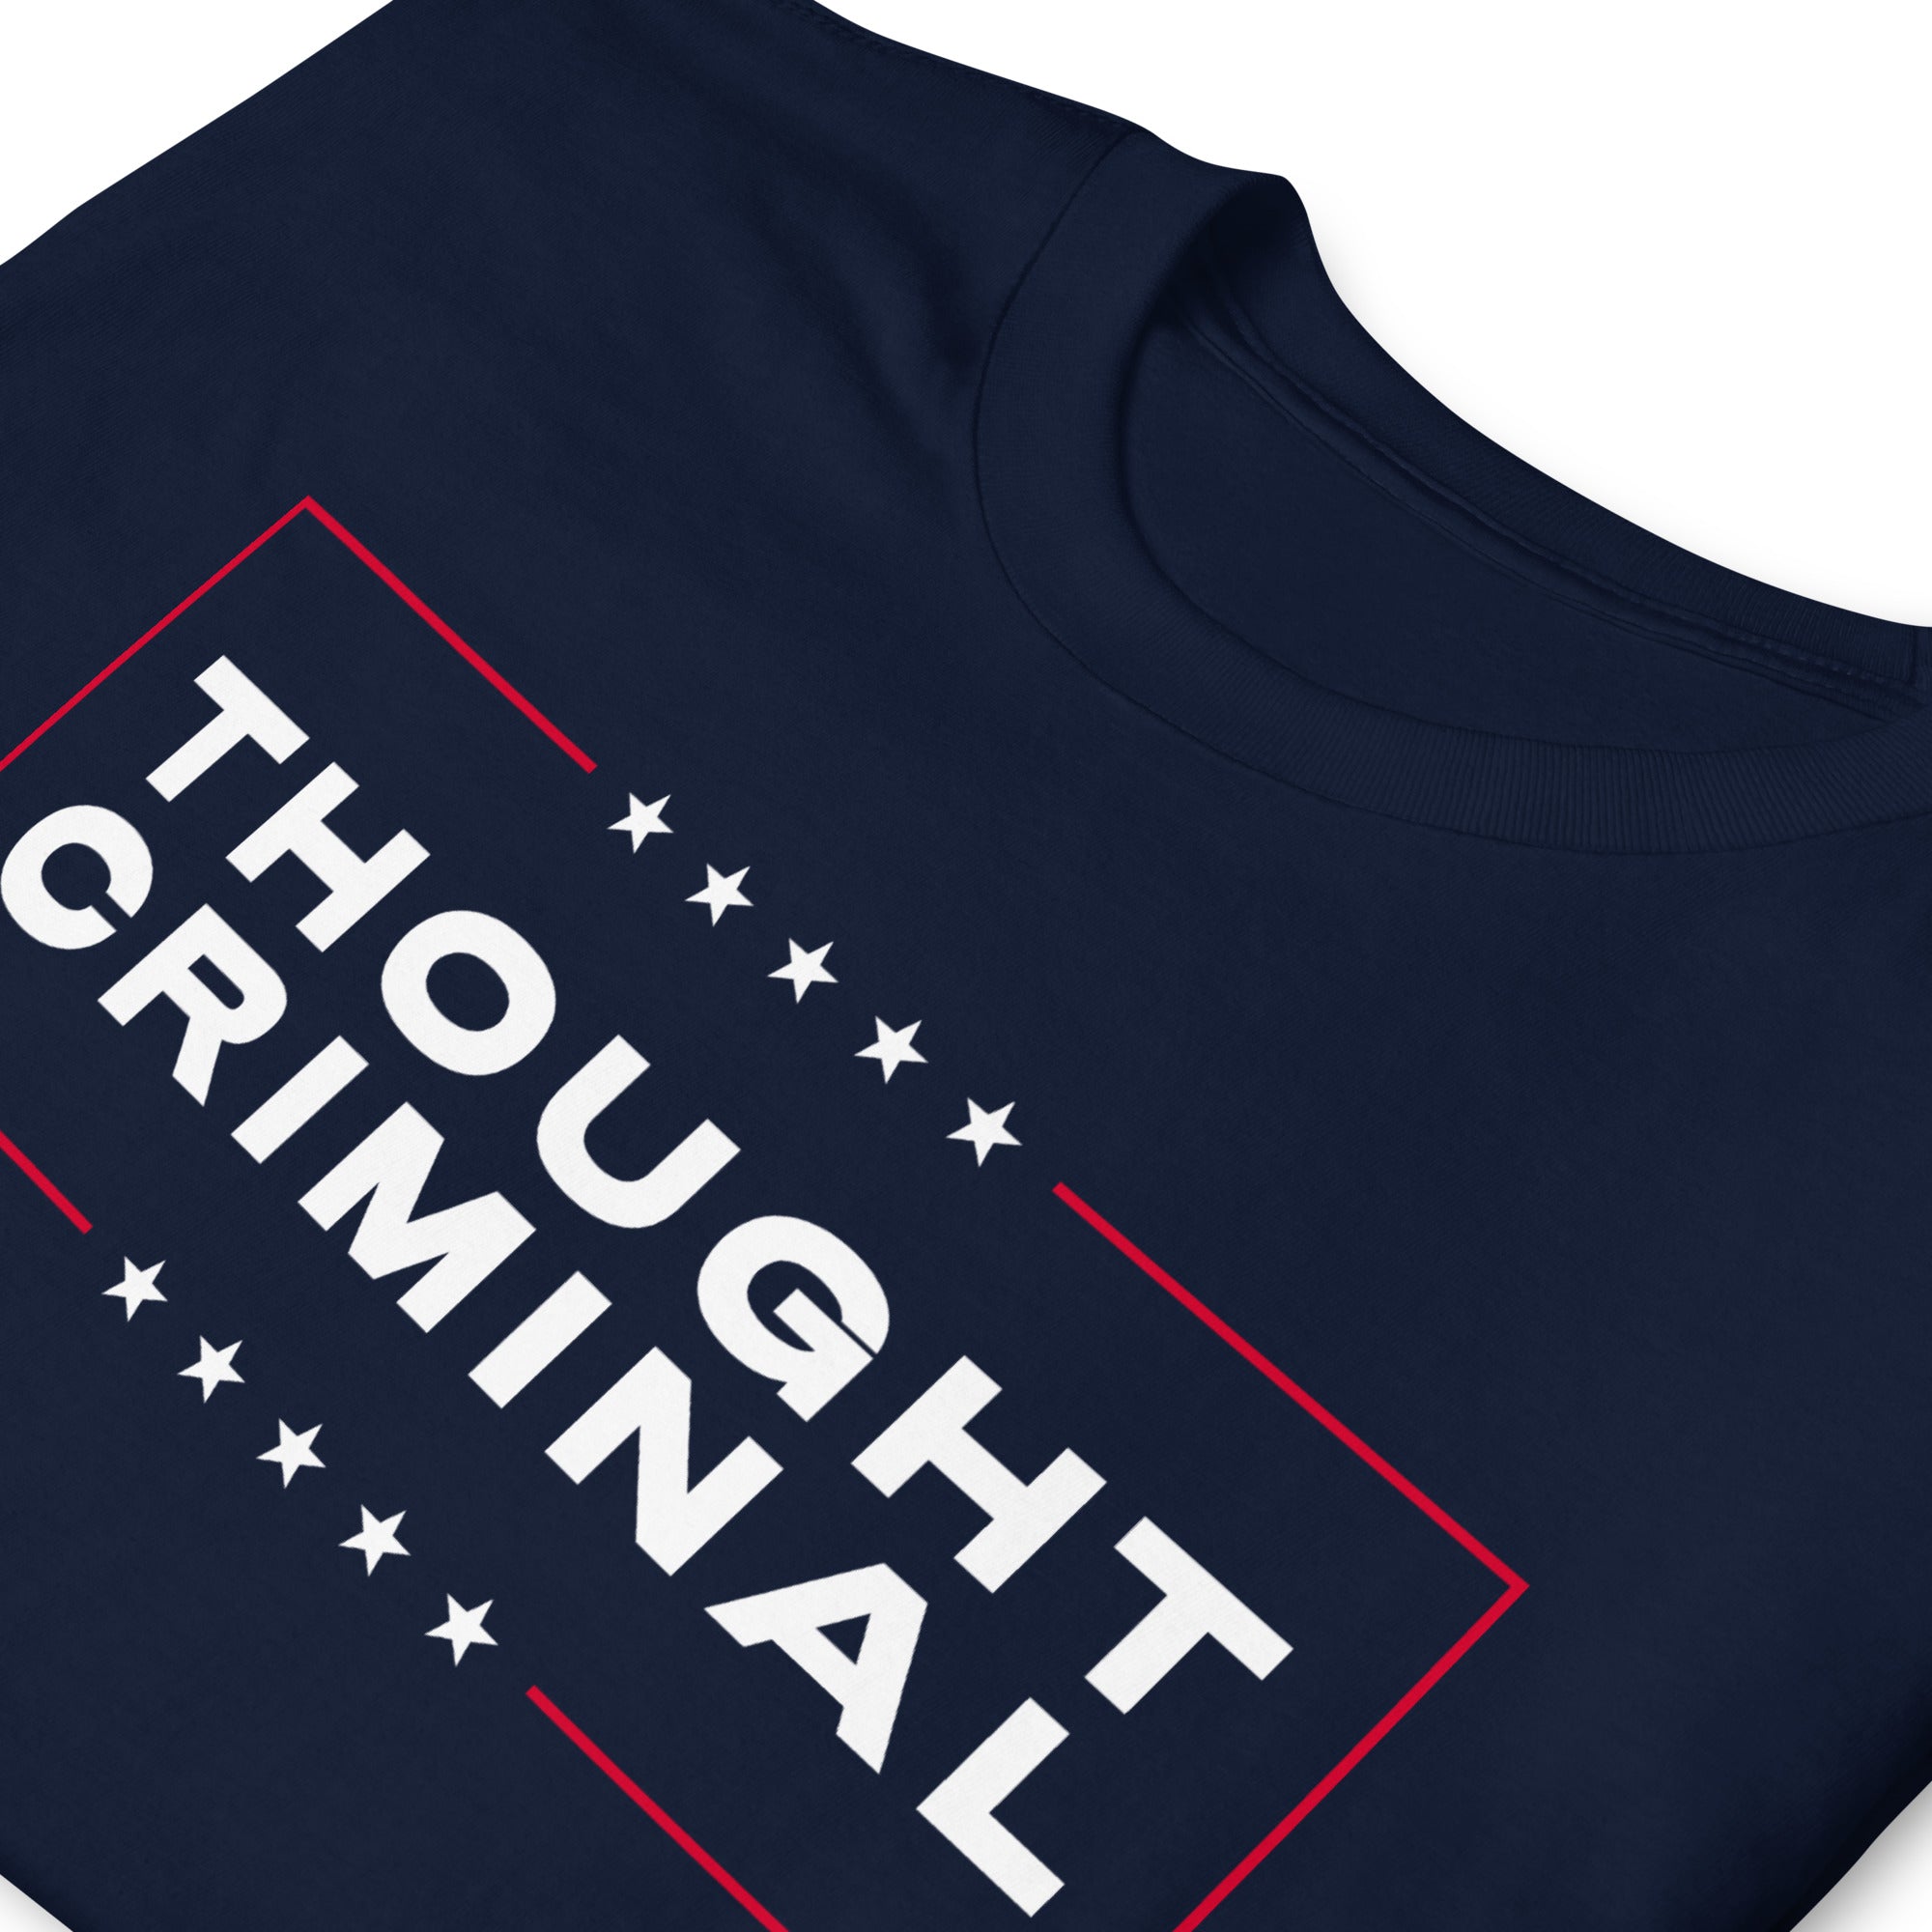 Thought Criminal Campaign T-Shirt